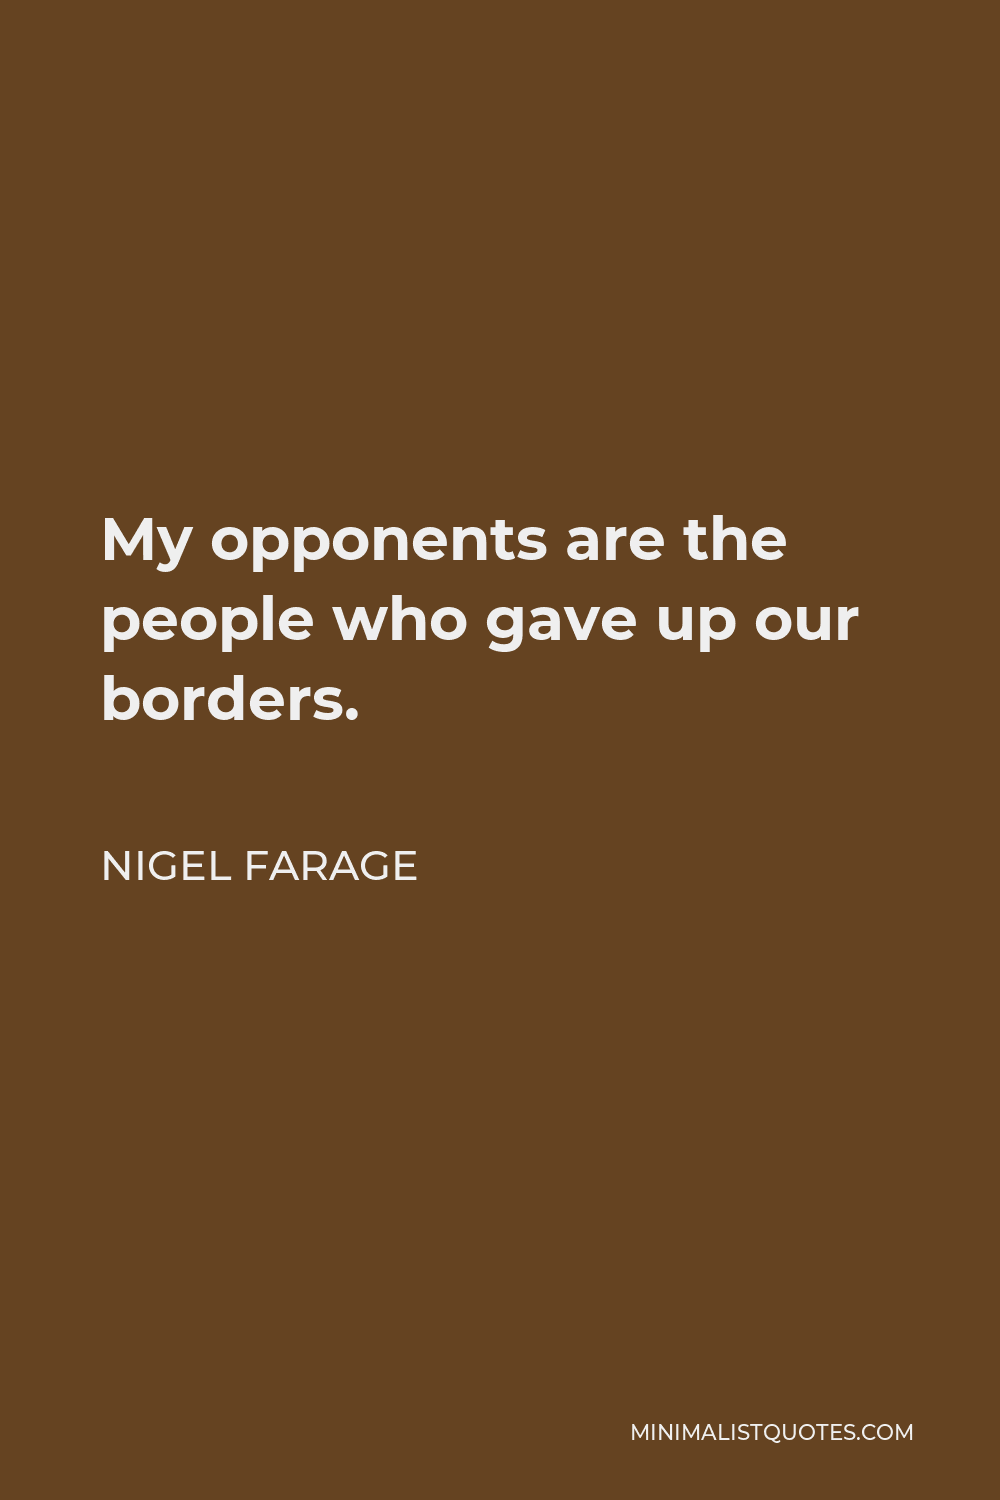 Nigel Farage Quote - My opponents are the people who gave up our borders.